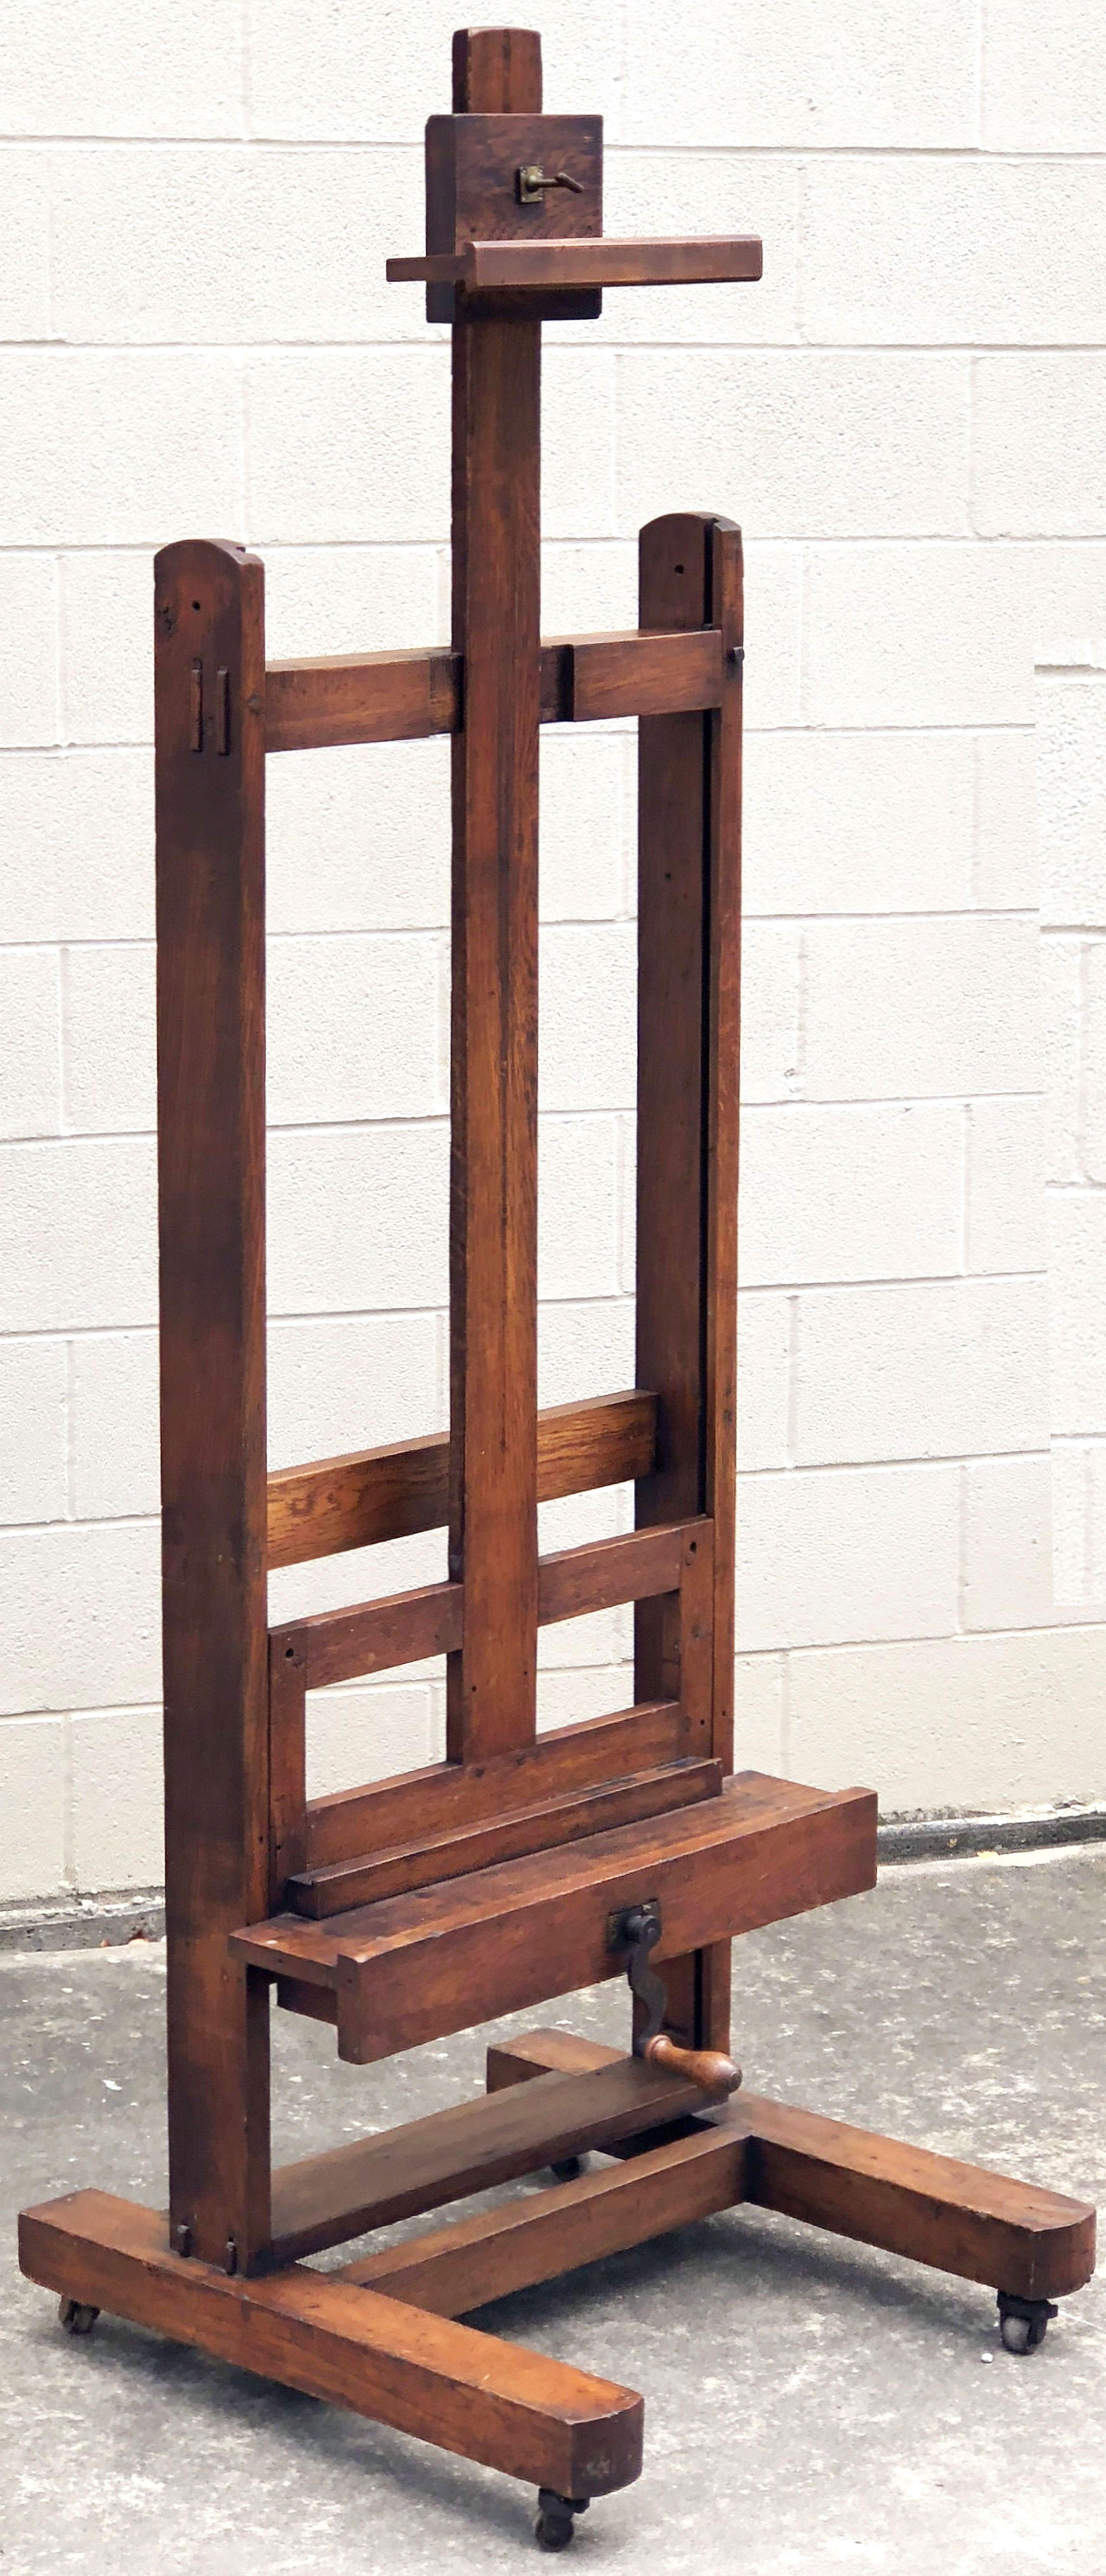 Metal Large English Artist's Display or Floor Easel with Adjustable Tray and Crank